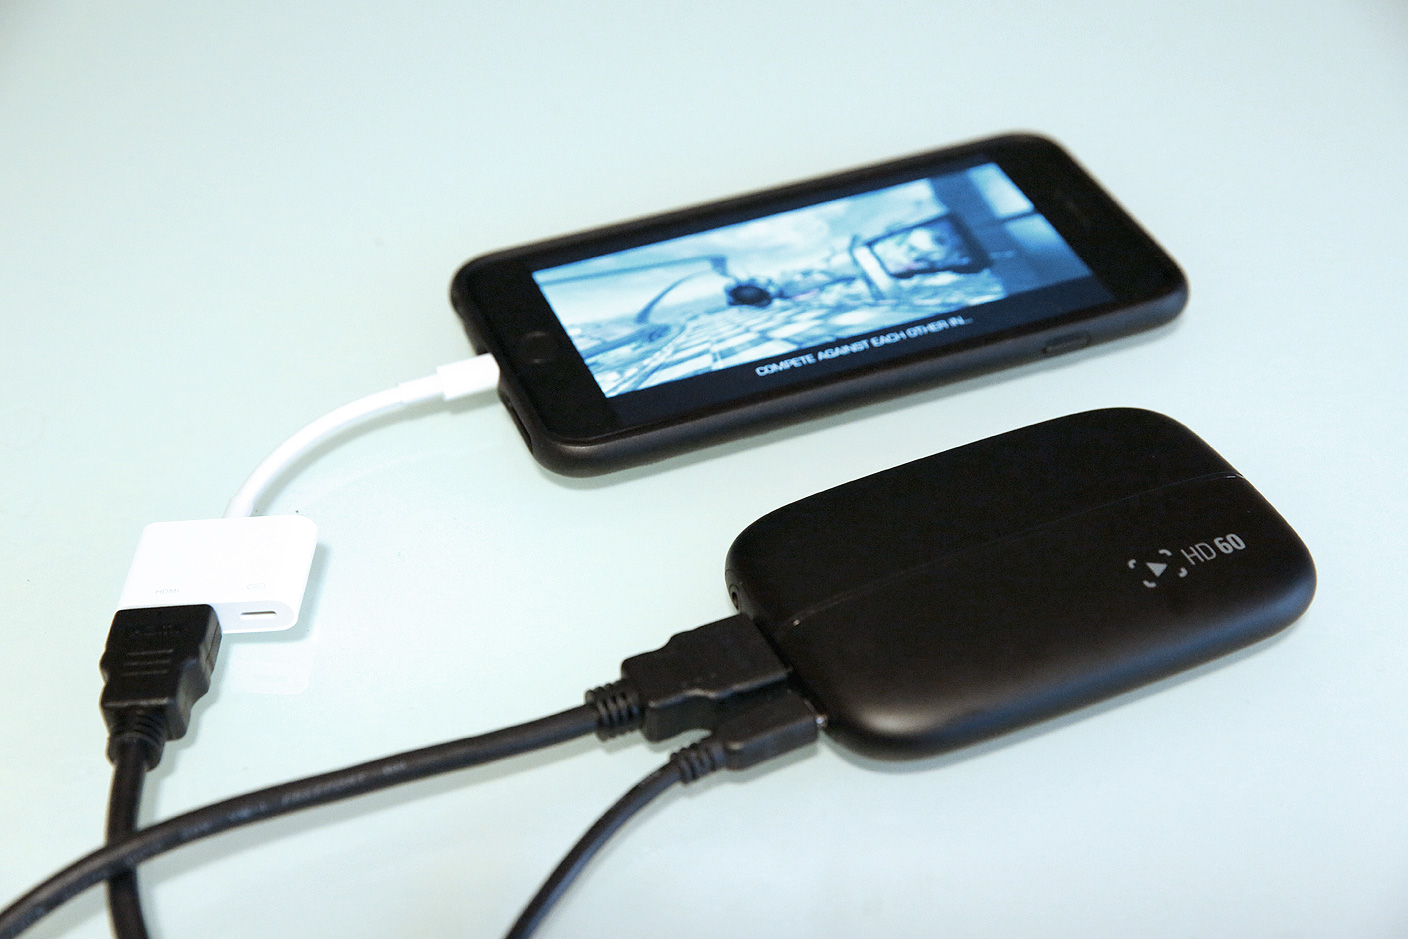 Elgato Game Capture HD60 review